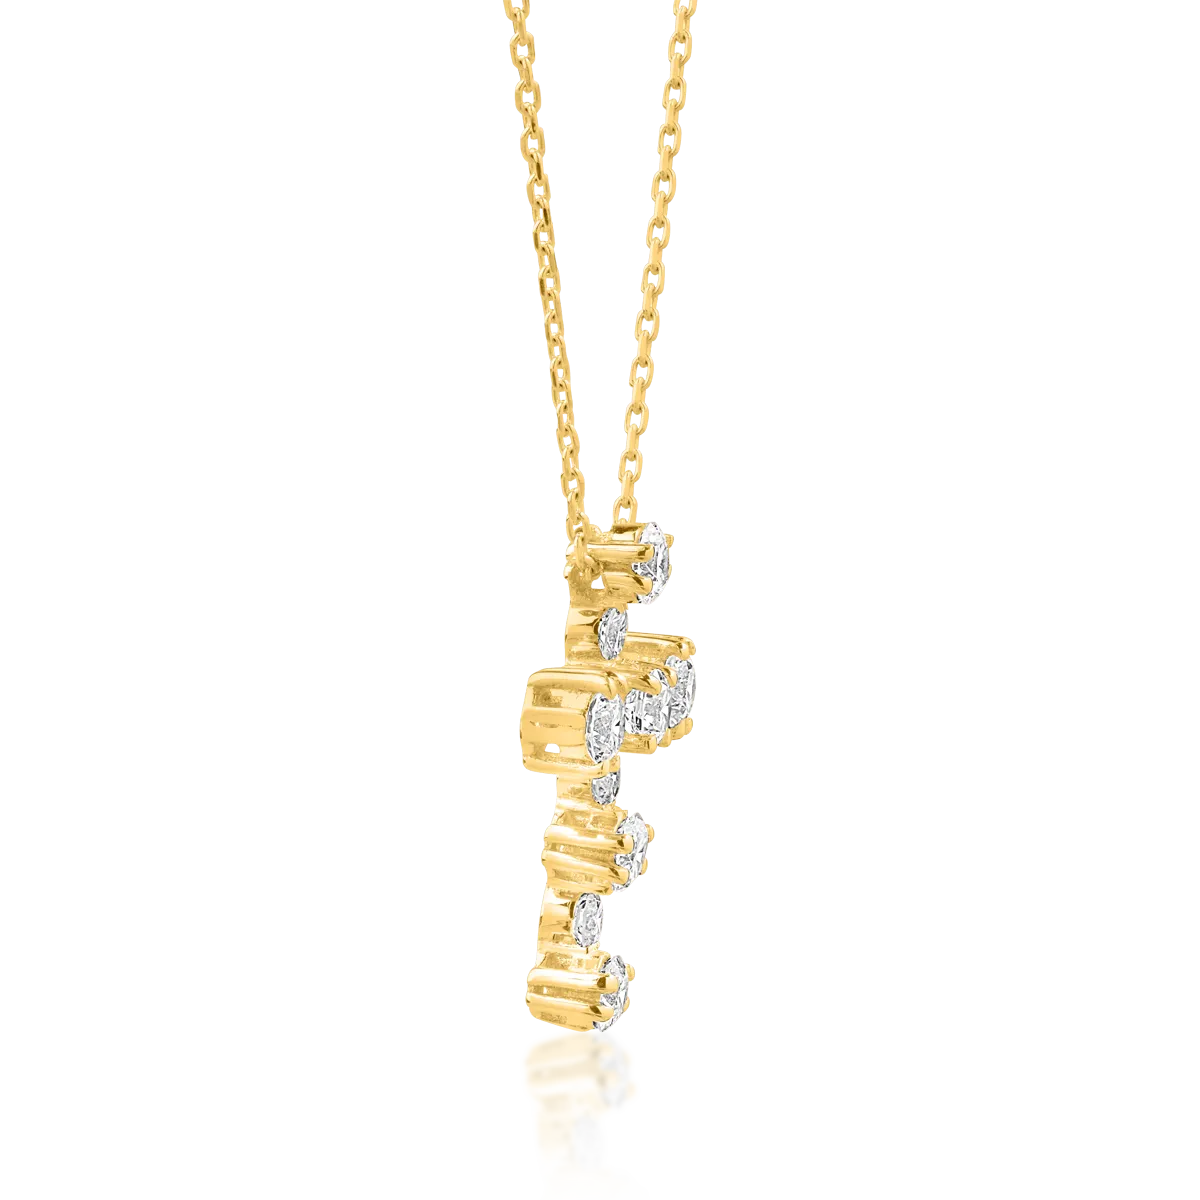 18K yellow gold pendant necklace with 0.61ct diamonds